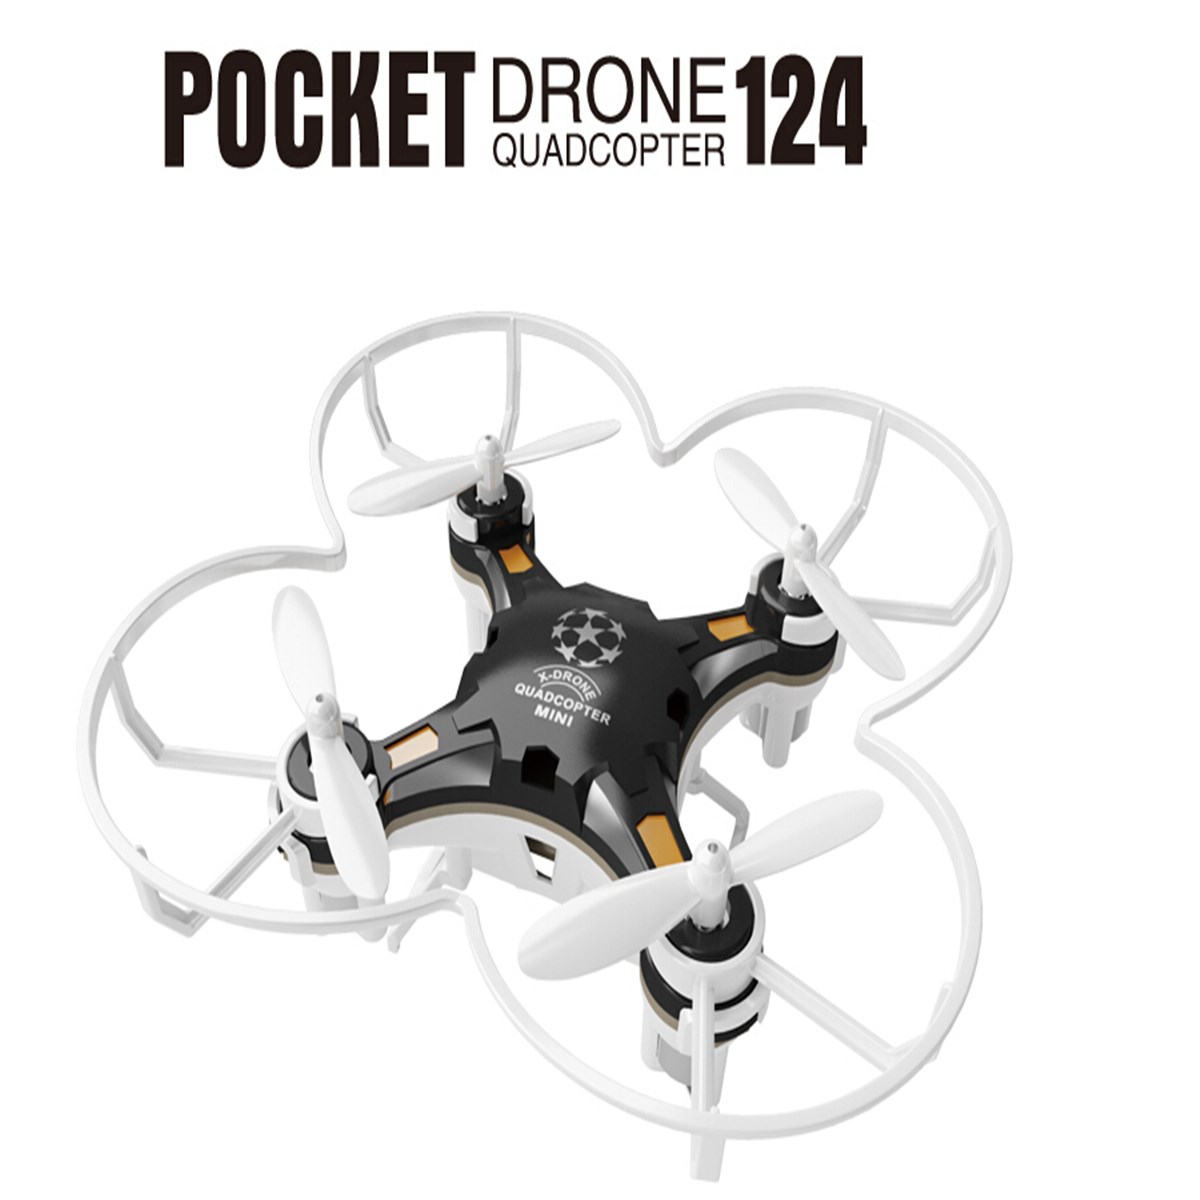 New-Hot-Sale-FQ777-124-Pocket-Drone-4CH-6Axis-Gyro-Quadcopter-With-Switchable-Controller-RTF-Remote.jpg?width=500